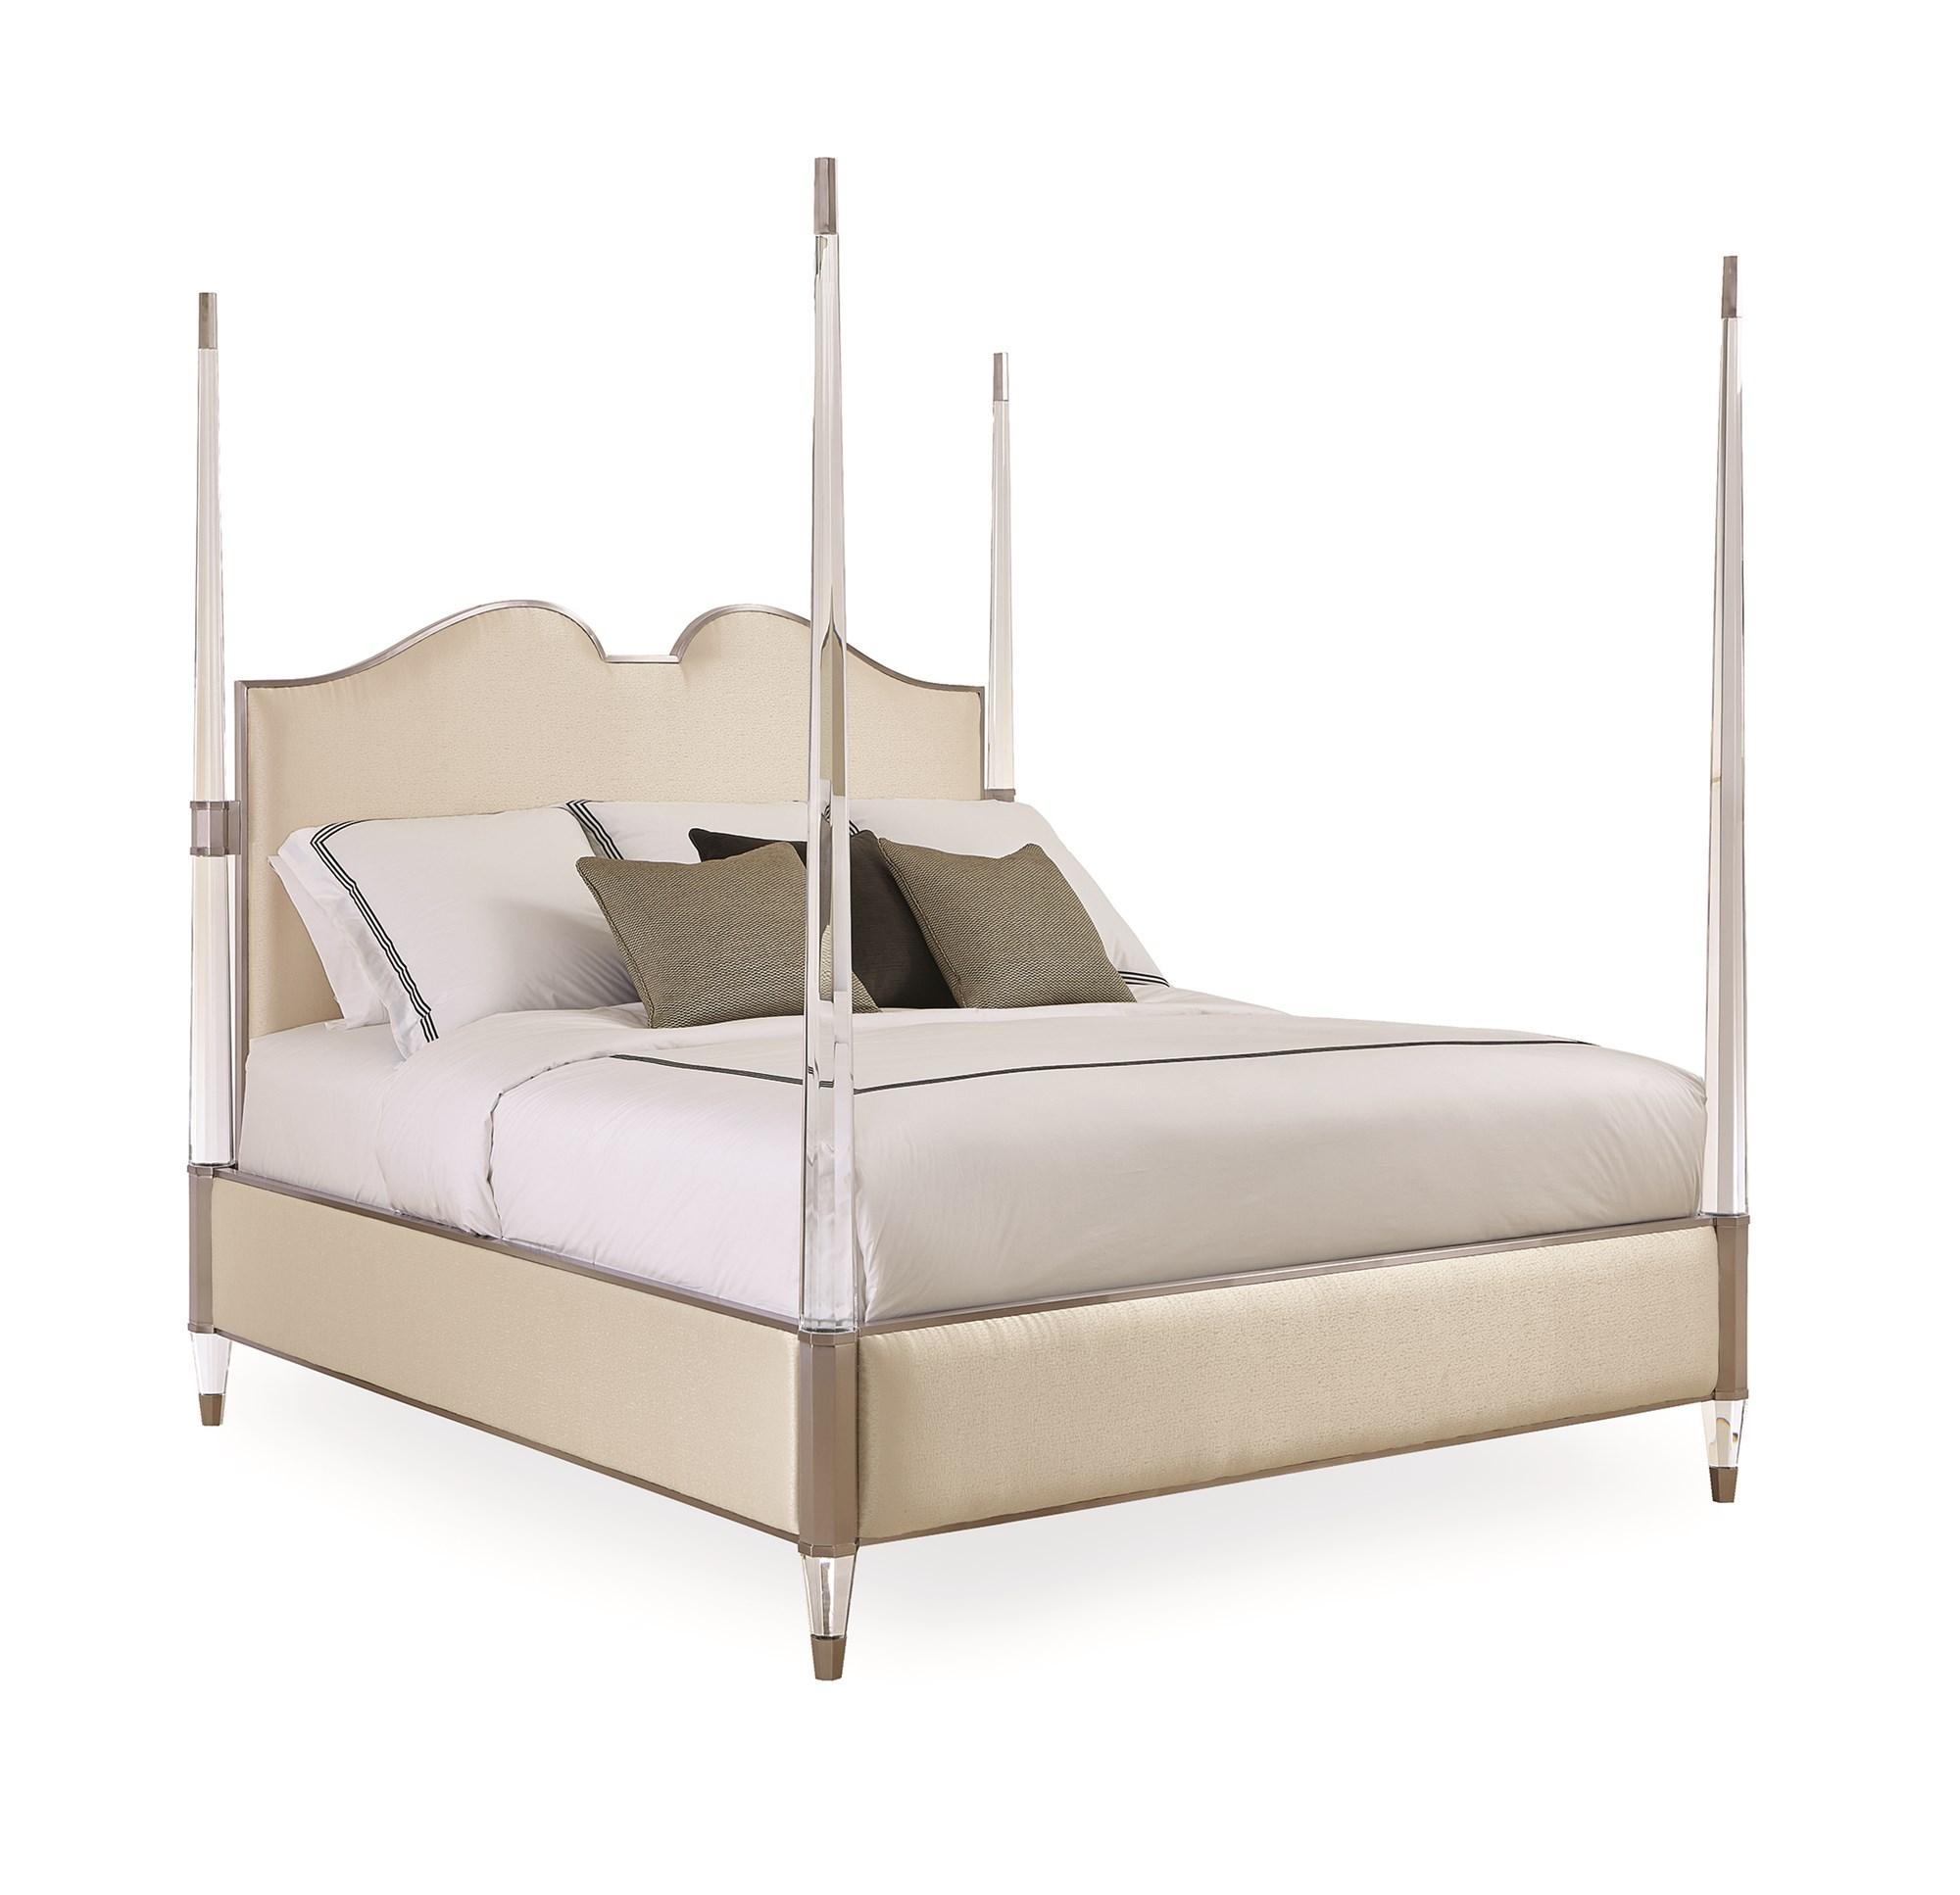 Contemporary Poster Bed THE POST IS CLEAR CLA-417-141 in Cream Fabric